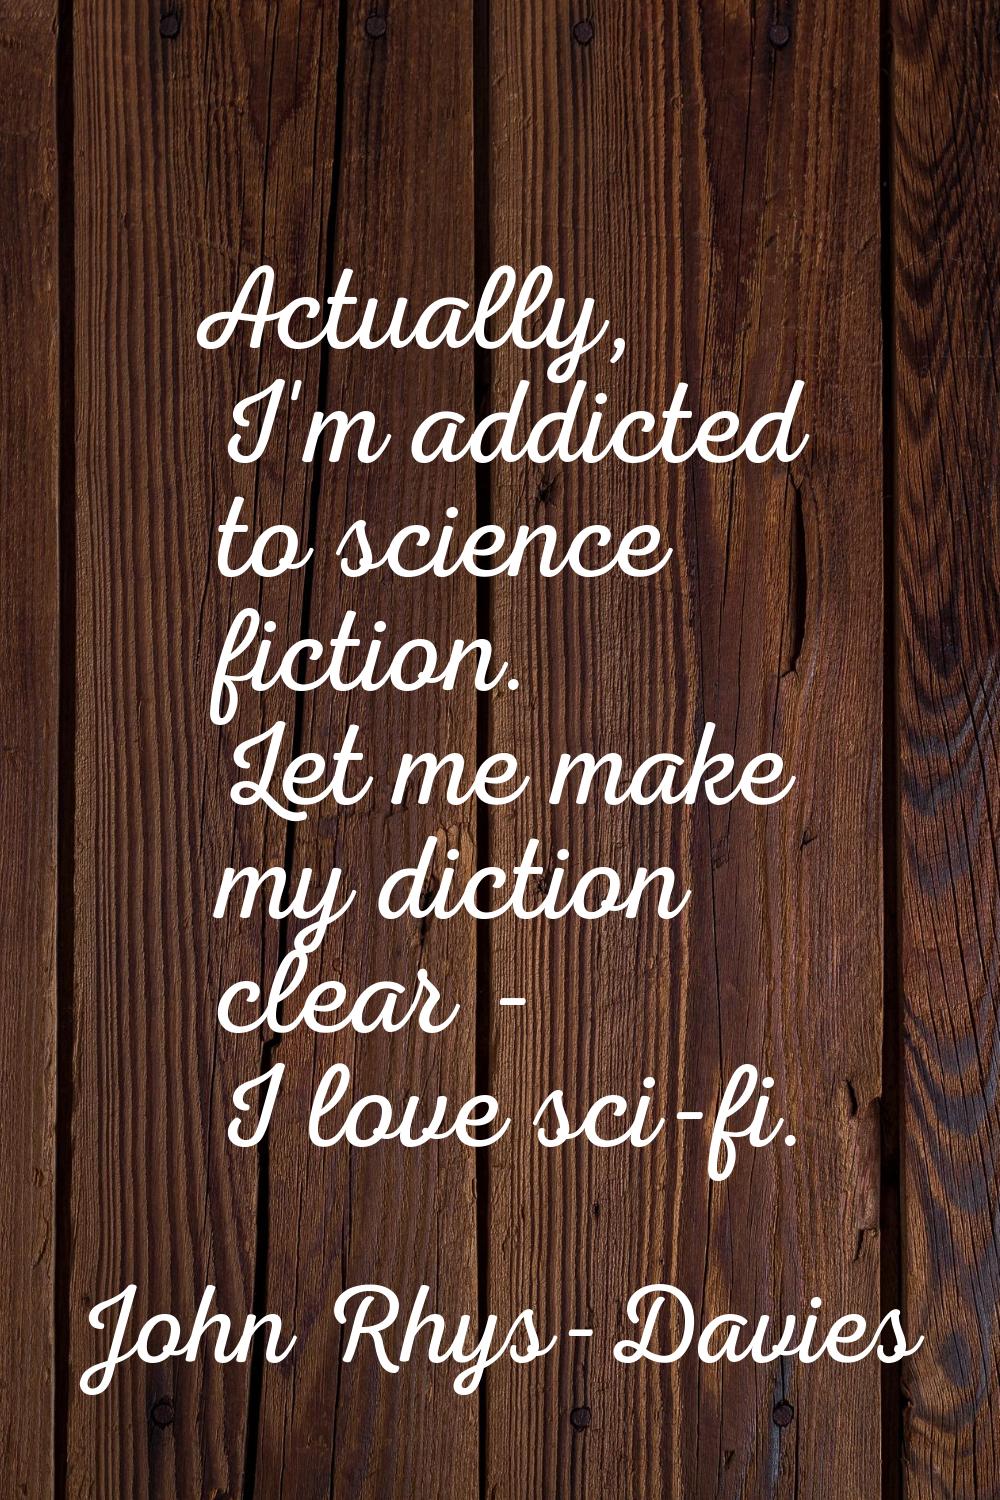 Actually, I'm addicted to science fiction. Let me make my diction clear - I love sci-fi.